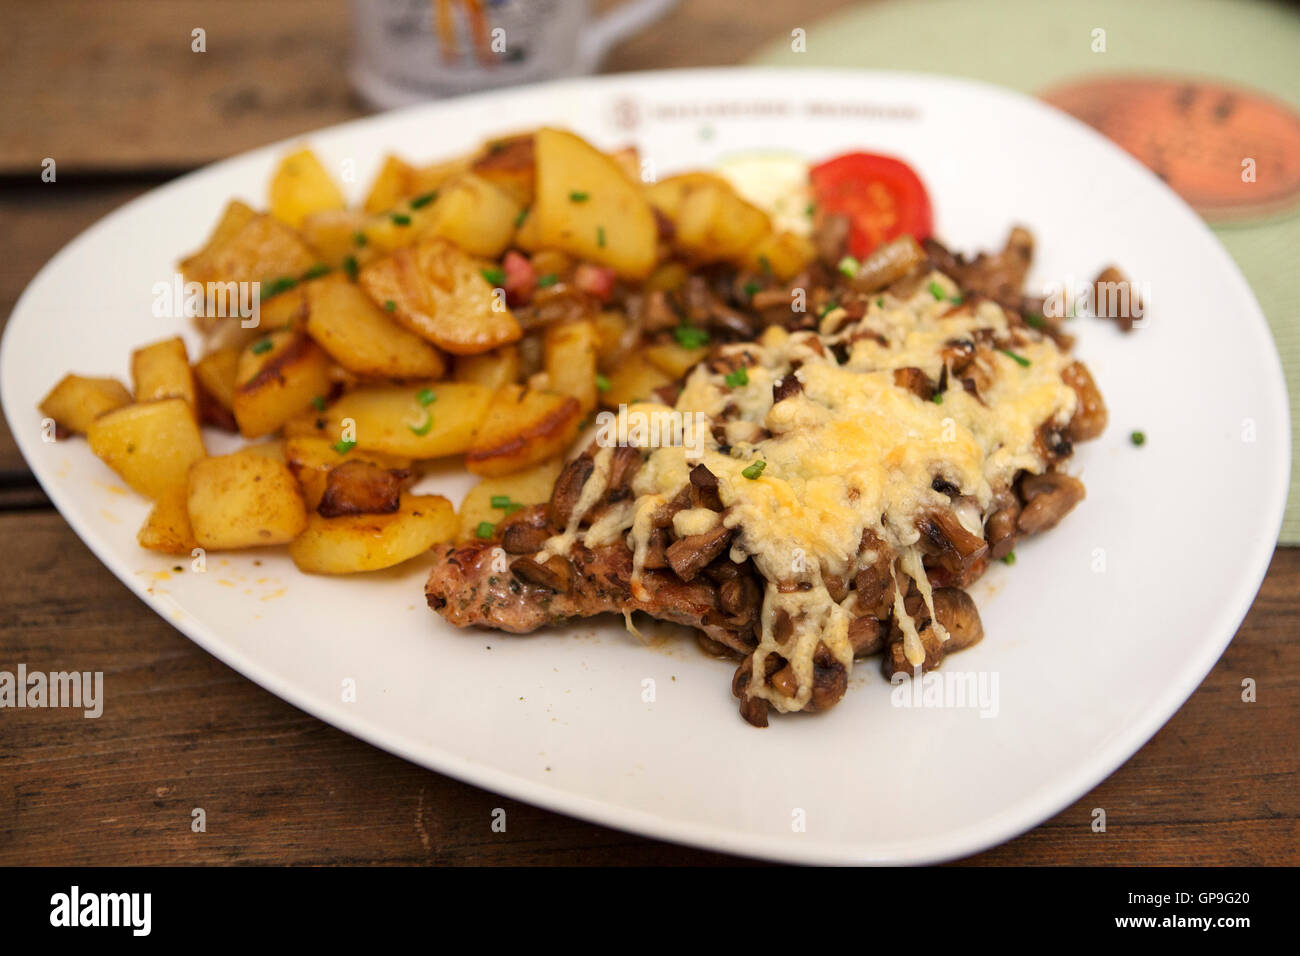 Pork steak served with cheese and mushrooms in Dresden, Germany. Bratkartoffeln (fried potatoes) are served with the dish. Stock Photo